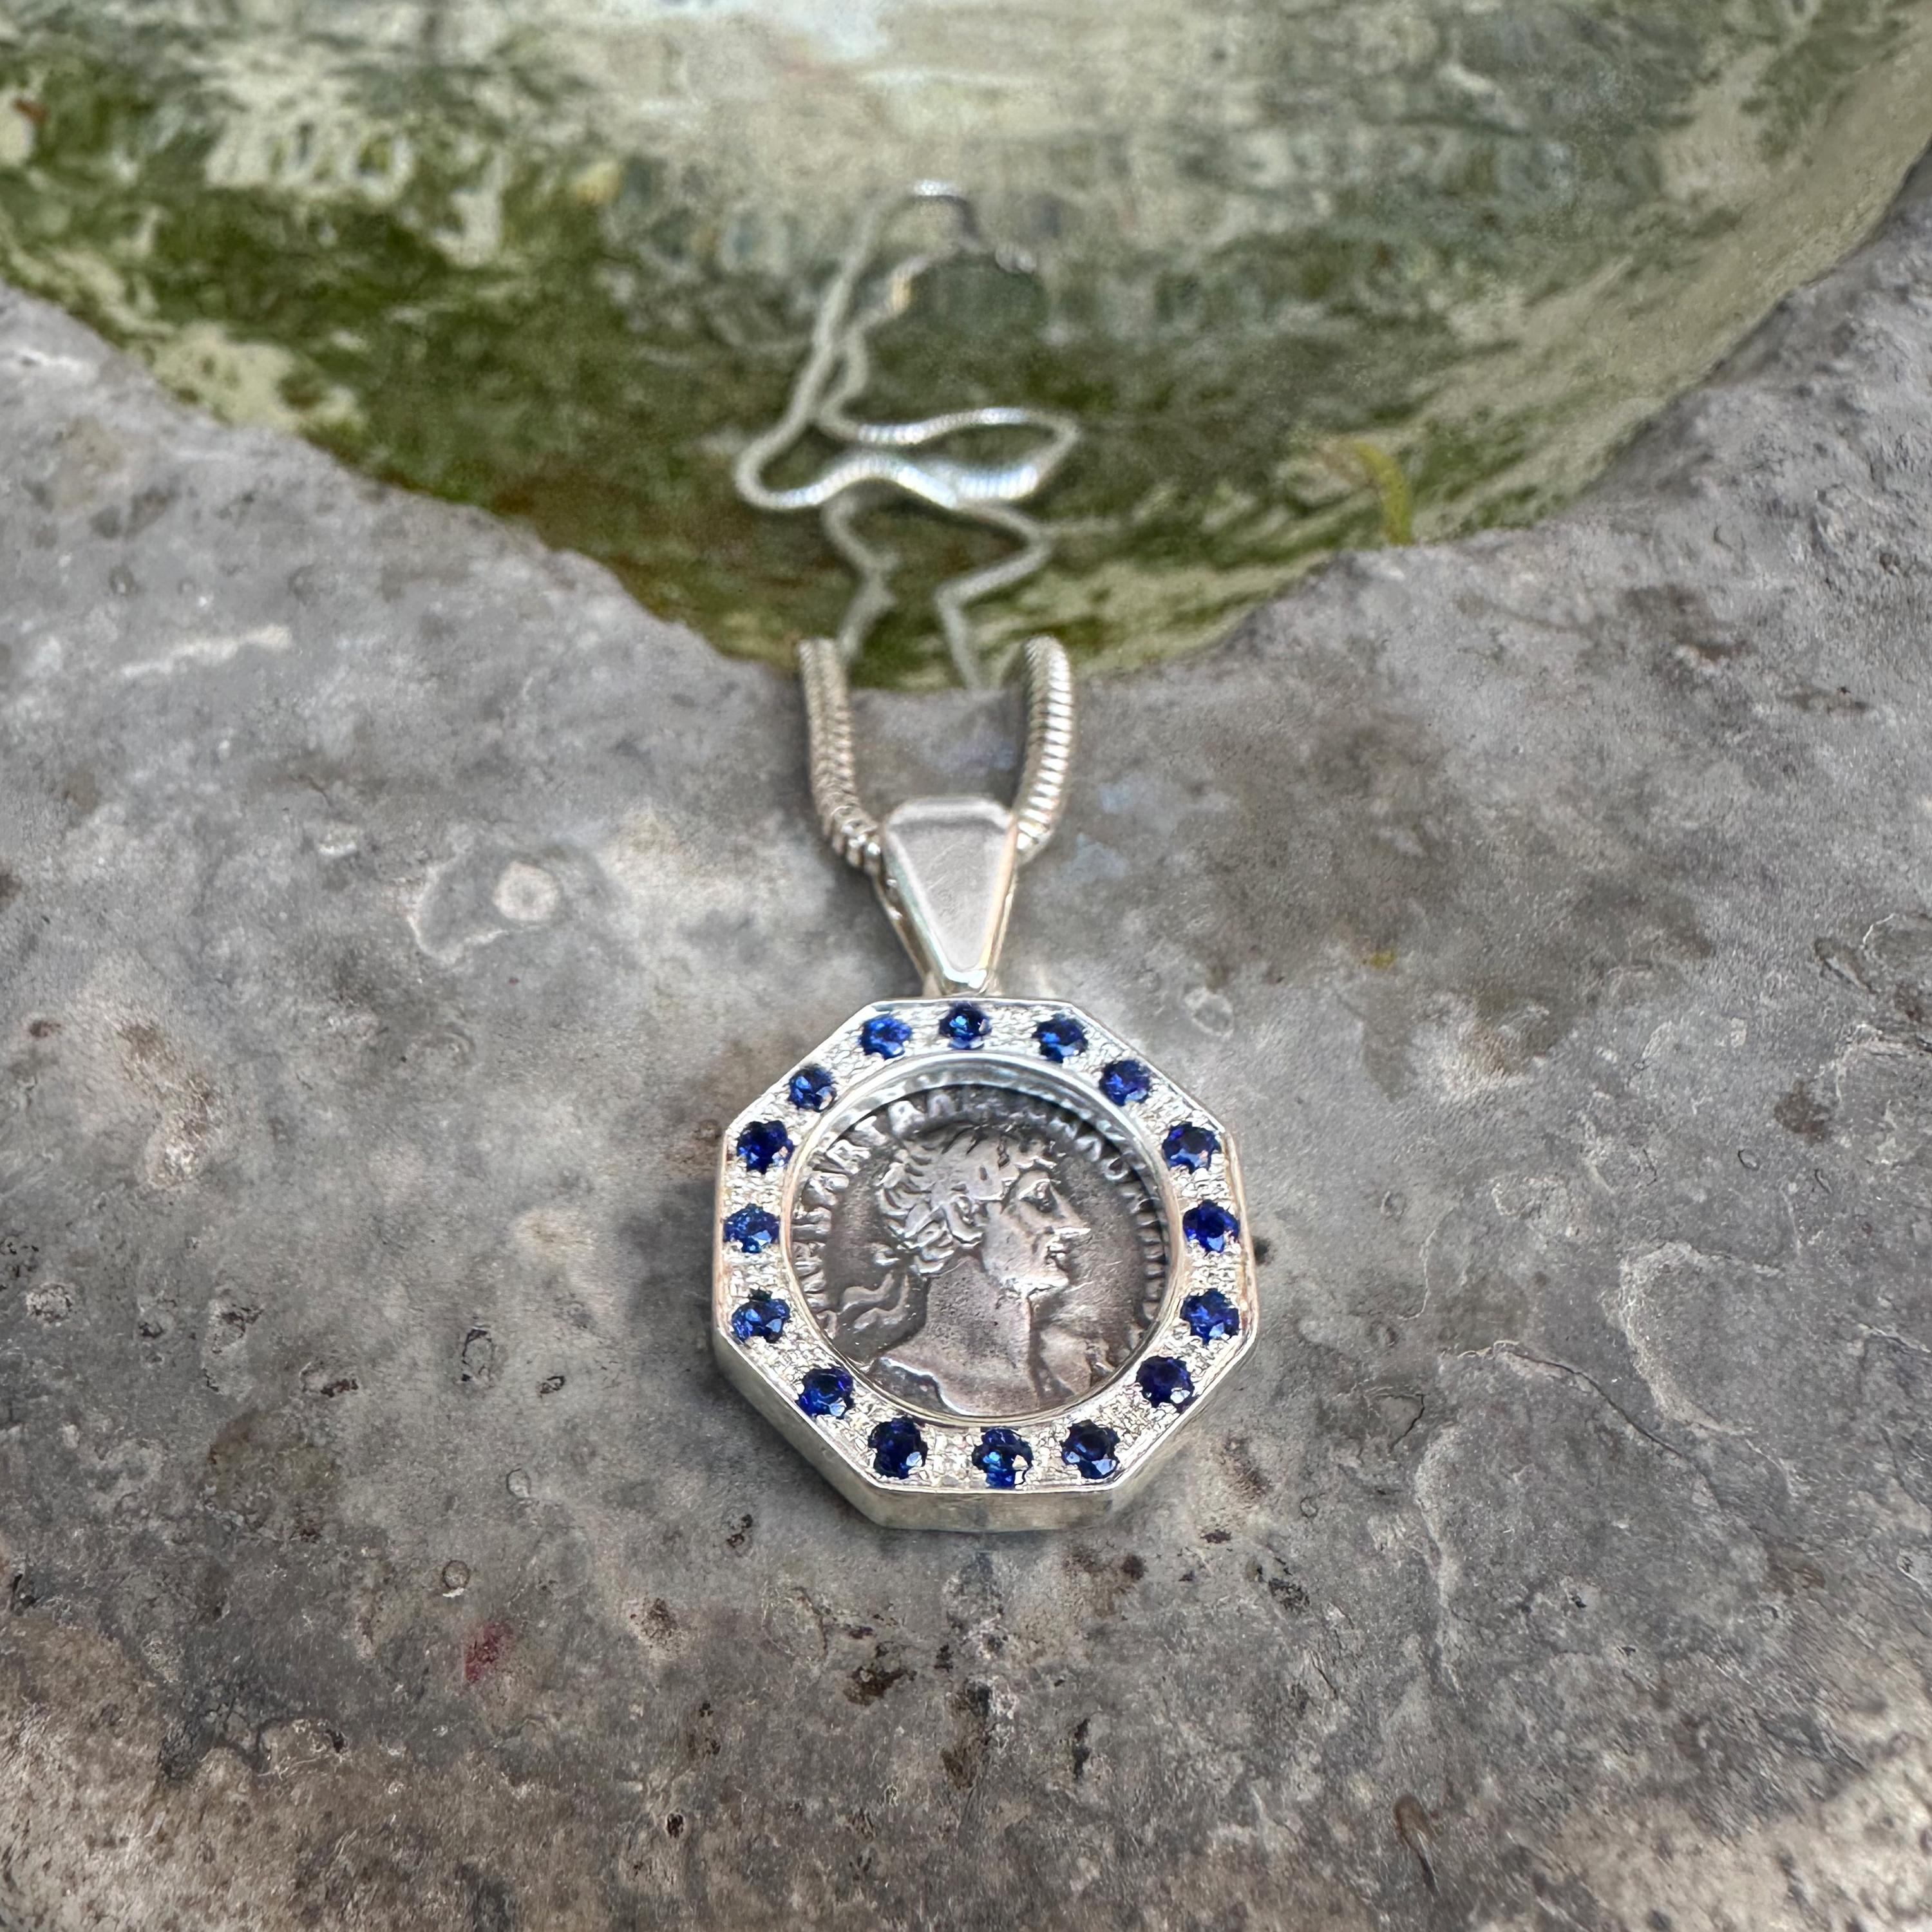 This sterling silver pendant holds an authentic Roman coin dating back to the 2nd century AD, depicting Emperor Hadrian, surrounded by 16 Sapphires. The reverse side showcases the goddess Aeternitas who, in the religion of Ancient Rome, was the